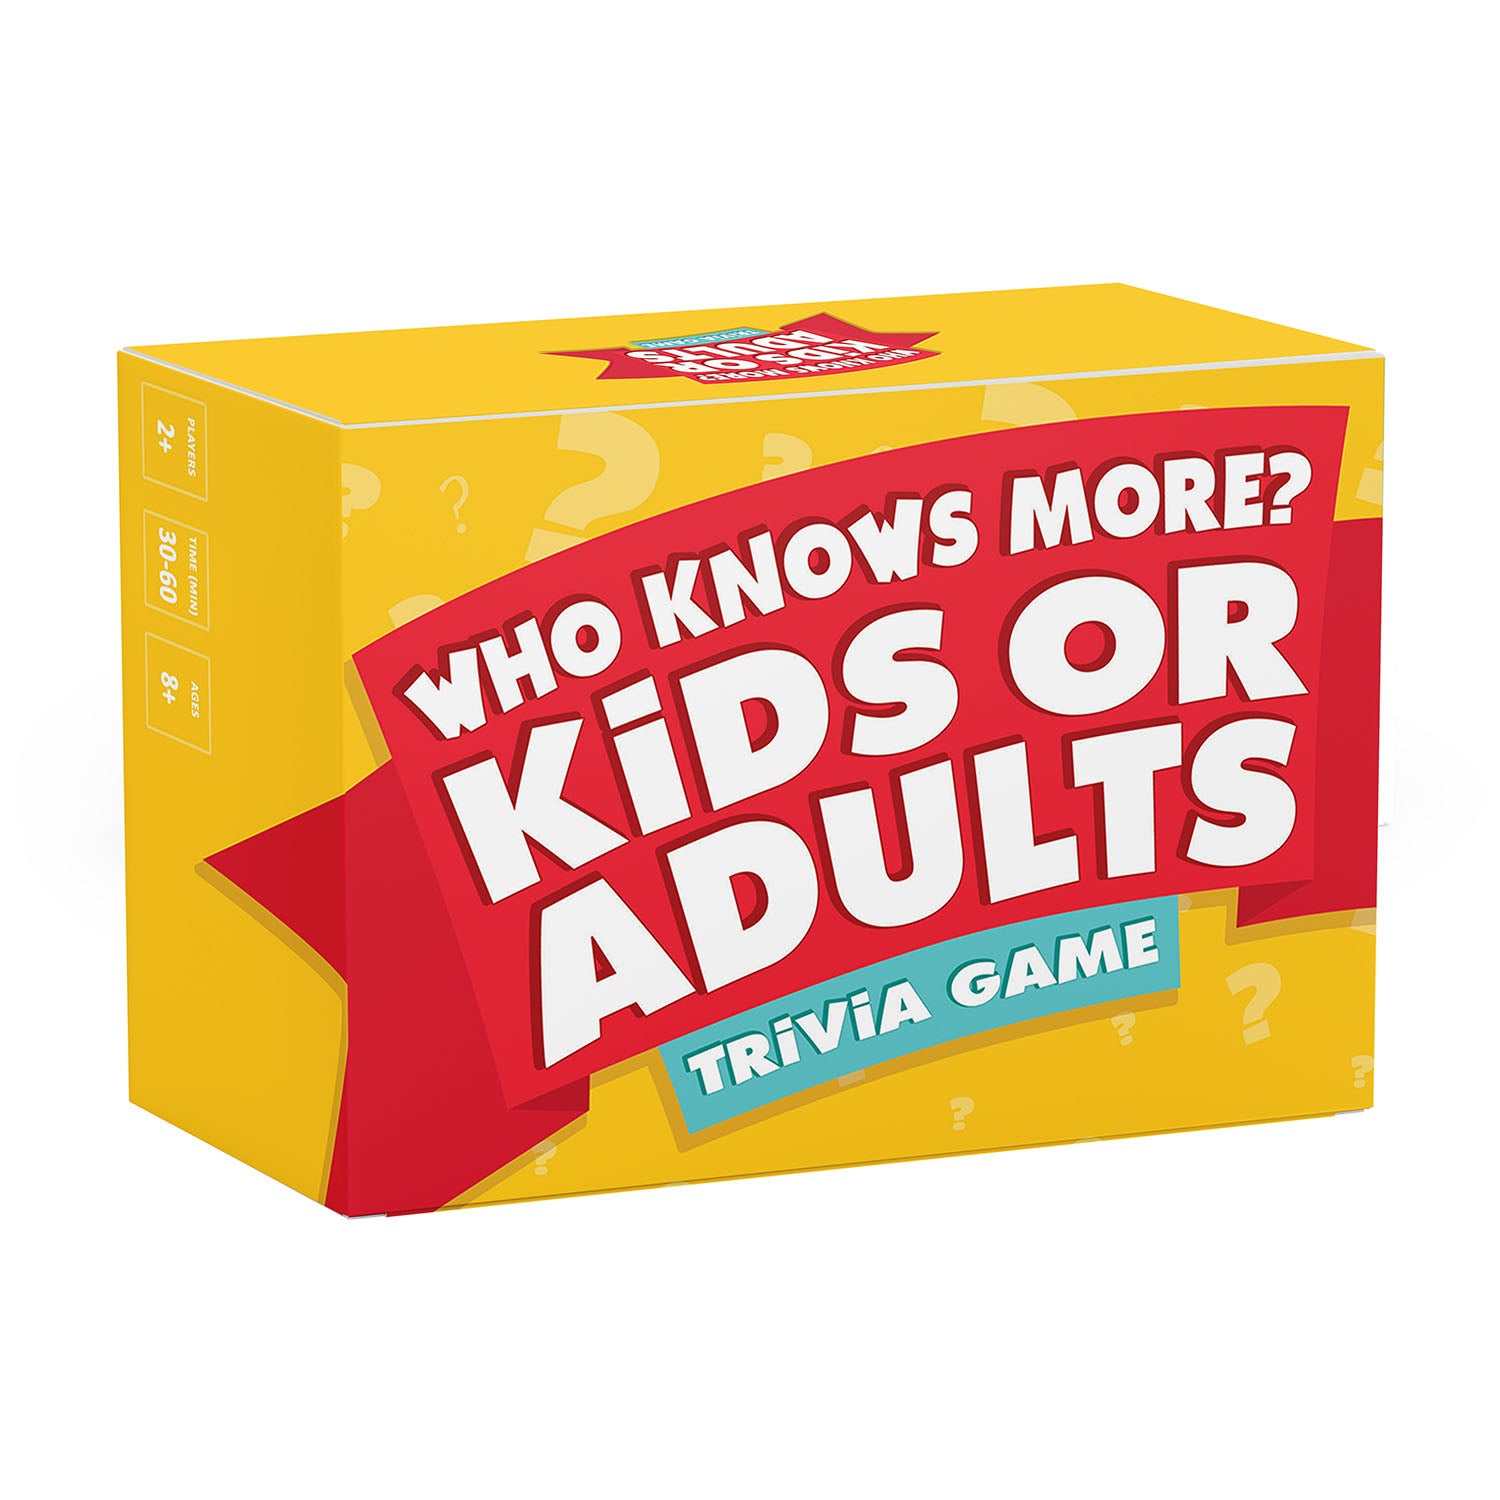 who knows more? kids or adults